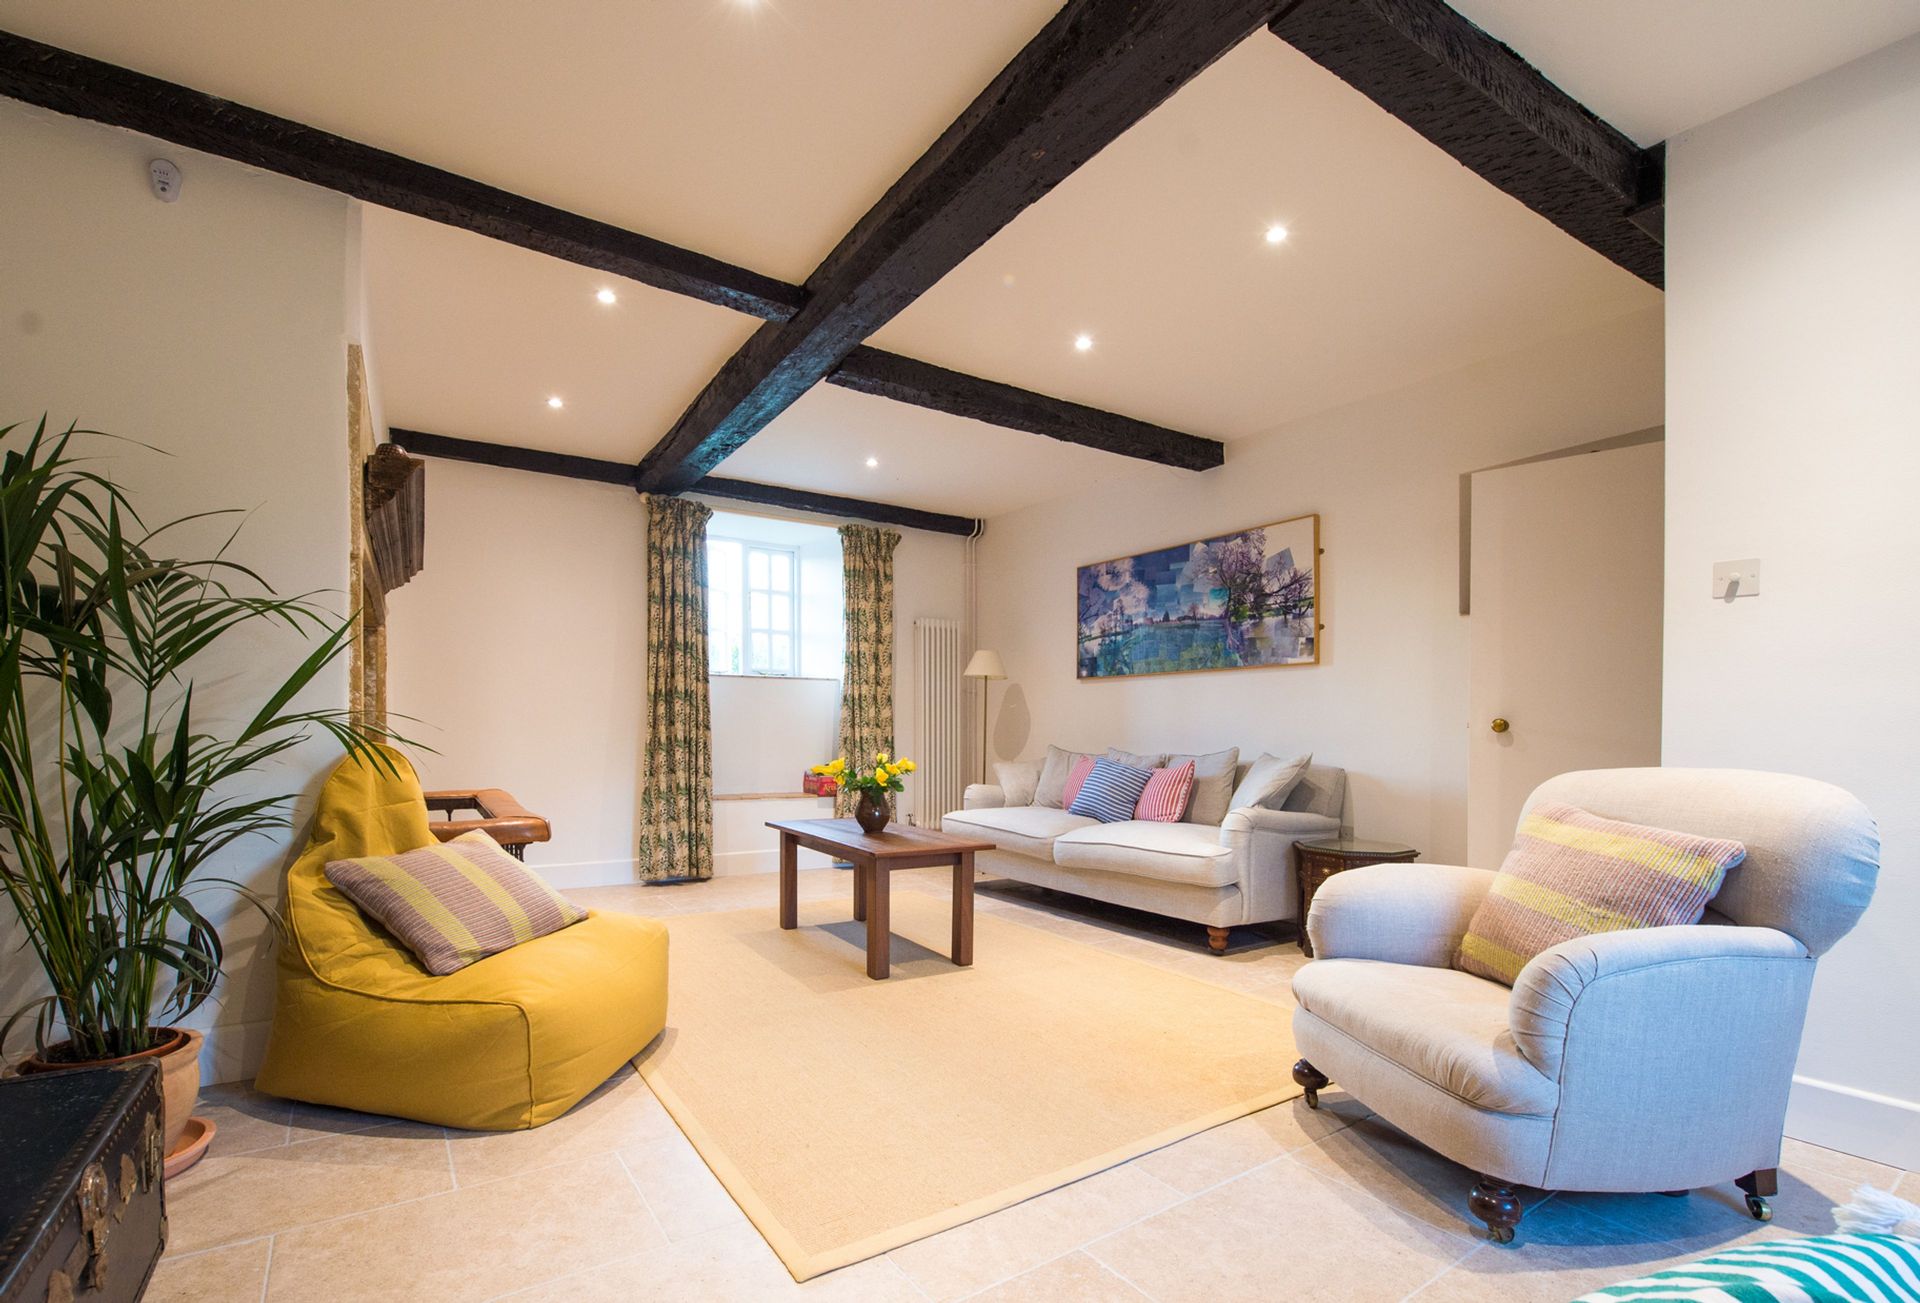 Brew House Cottage is located in Sherborne and surrounding villages